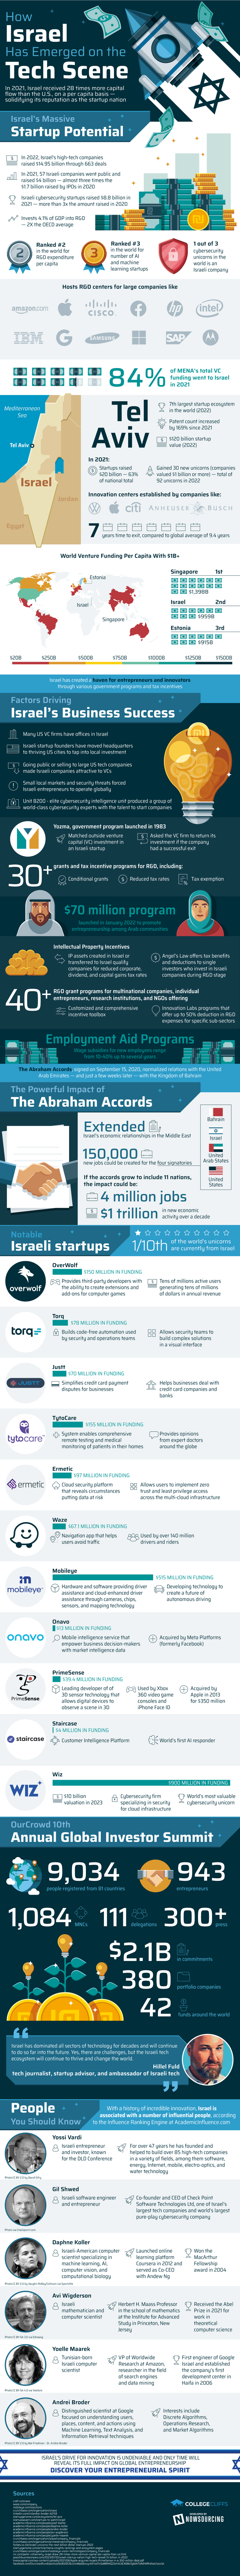 How Israel Has Emerged on the Tech Scene